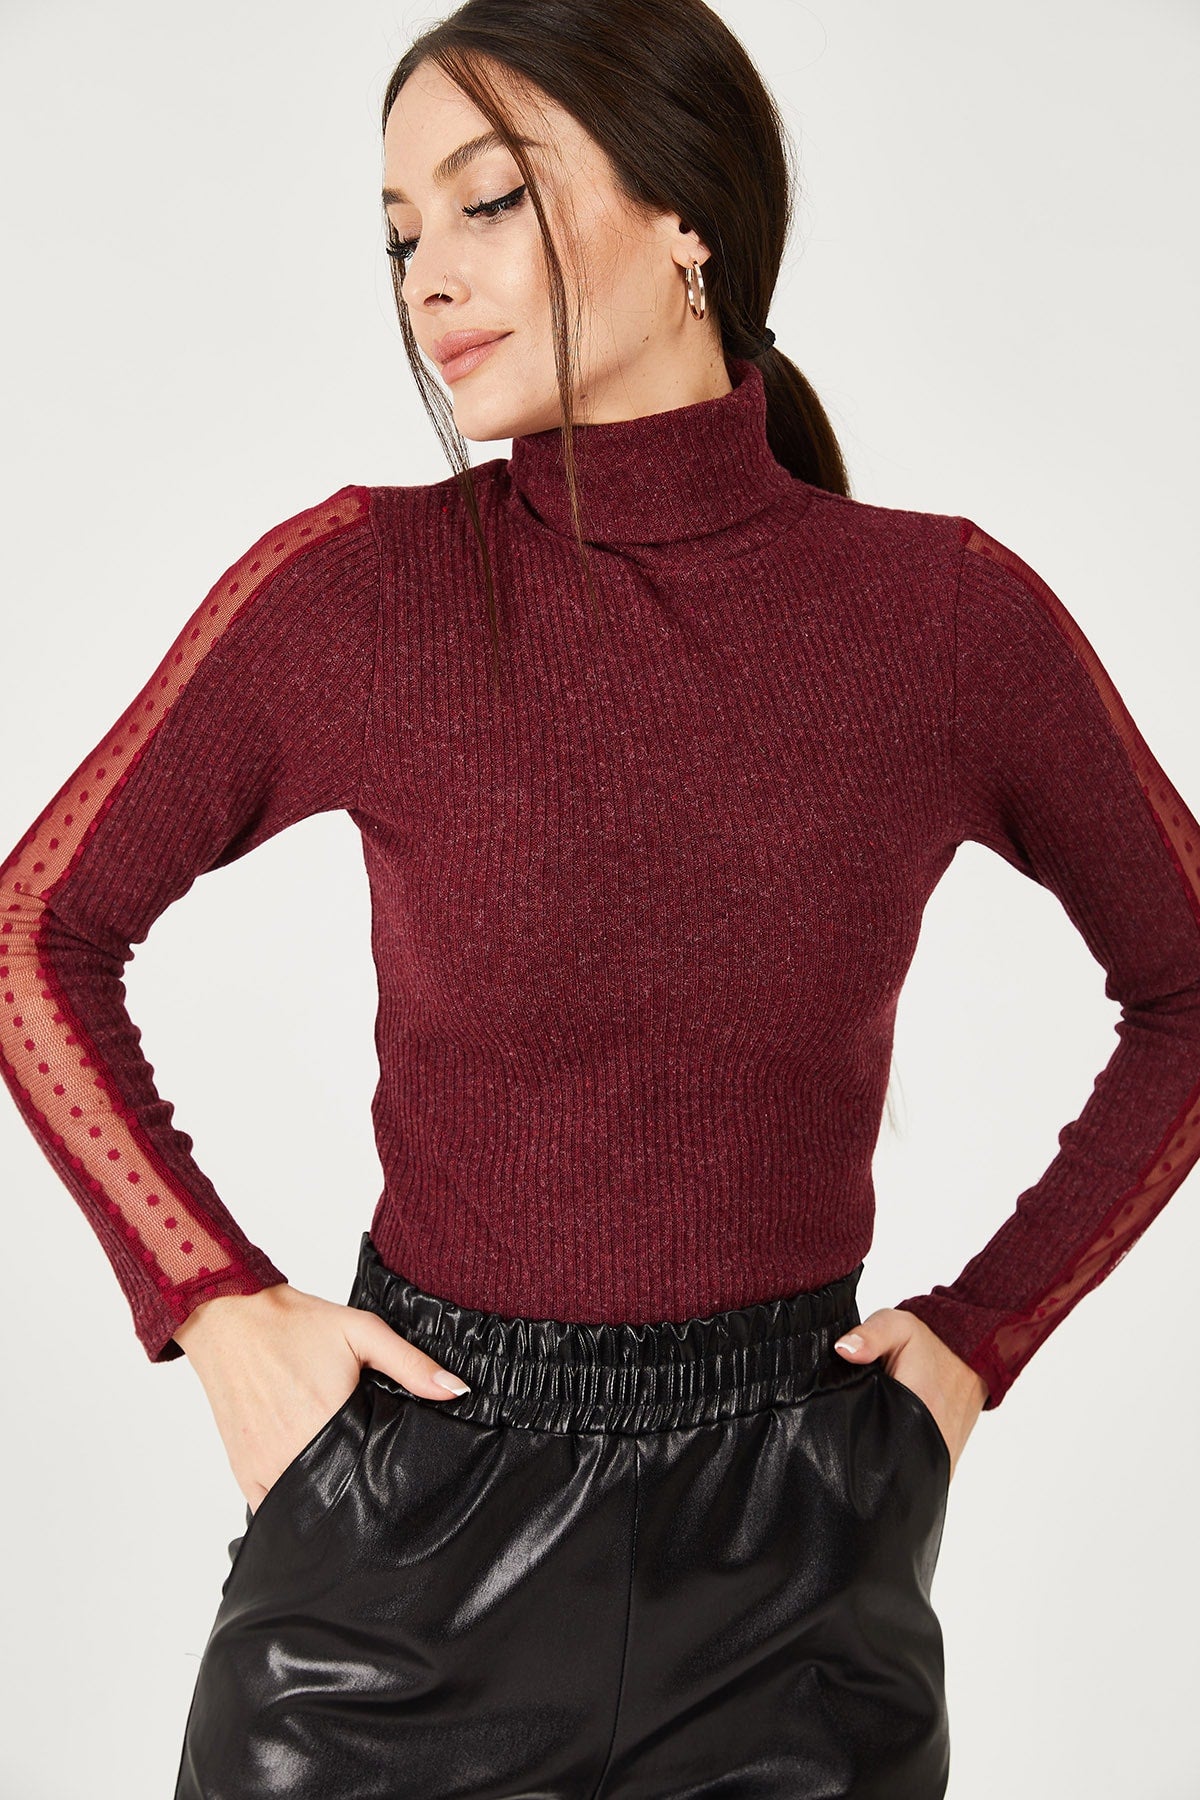 Female burgundy neck lever lace detailed knitwear sweater ARM-21K001056